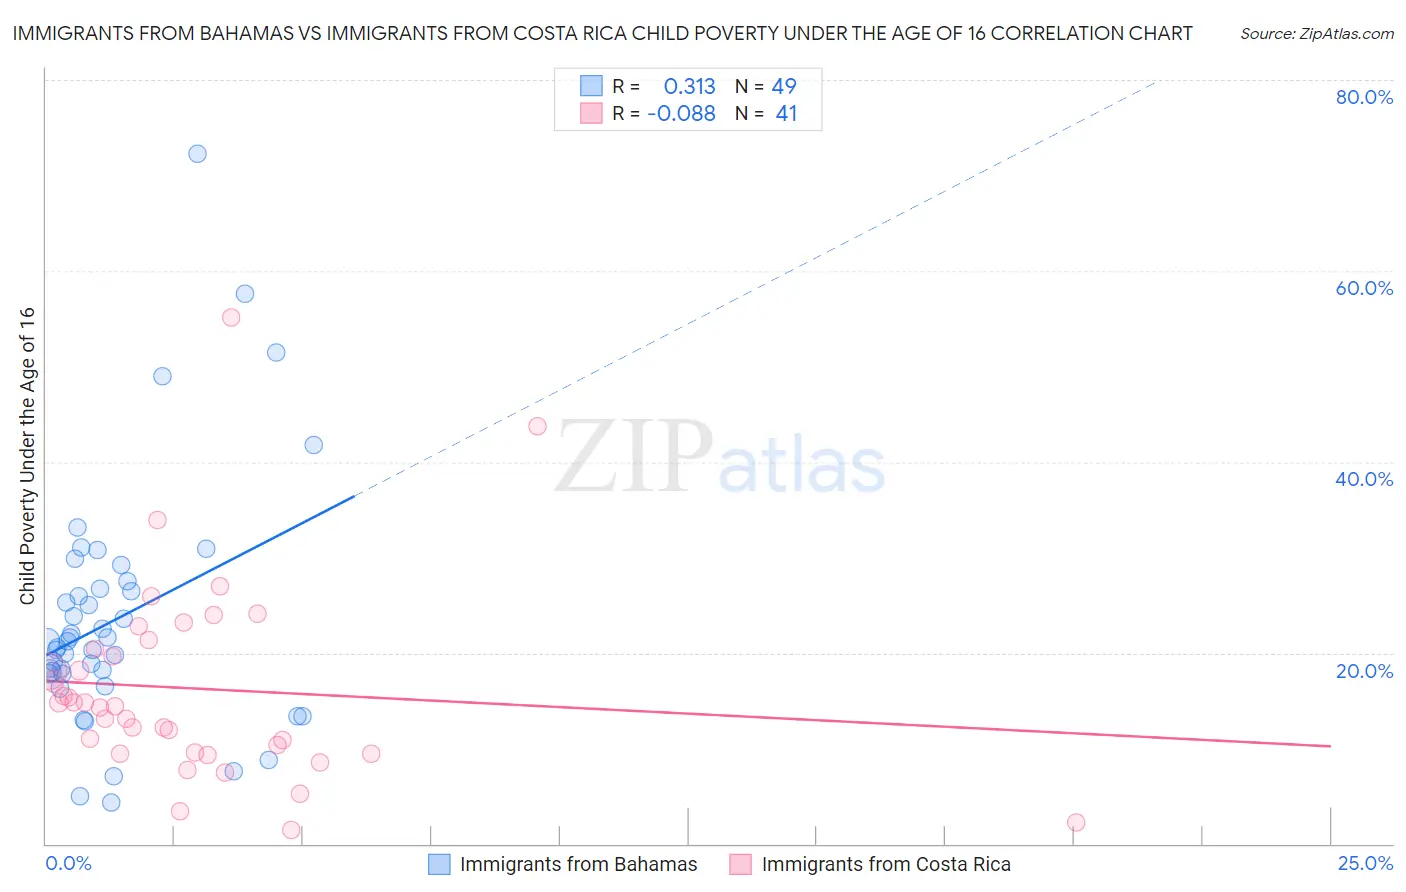 Immigrants from Bahamas vs Immigrants from Costa Rica Child Poverty Under the Age of 16